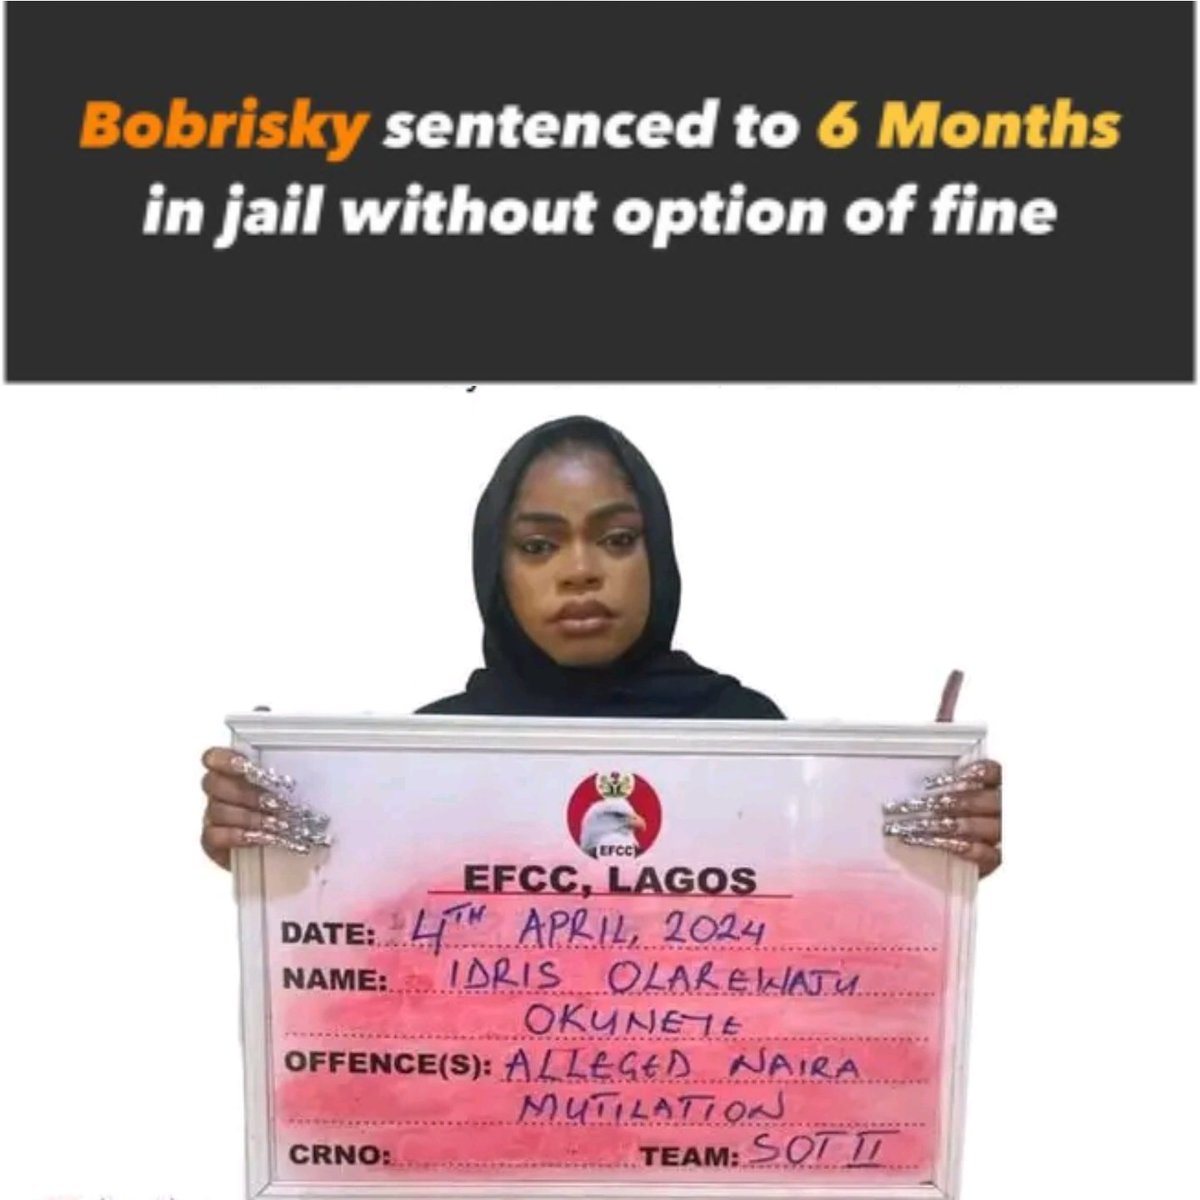 BREAKING NEWS: Bobrisky sentenced to 6 months in Jail without option of fine

Bobsisky's beard is growing Ooo
😩😩🙆🙆🤔

.
Seyi Iranians George Floyd Greenwood Emma Watson #TerfsWereRight